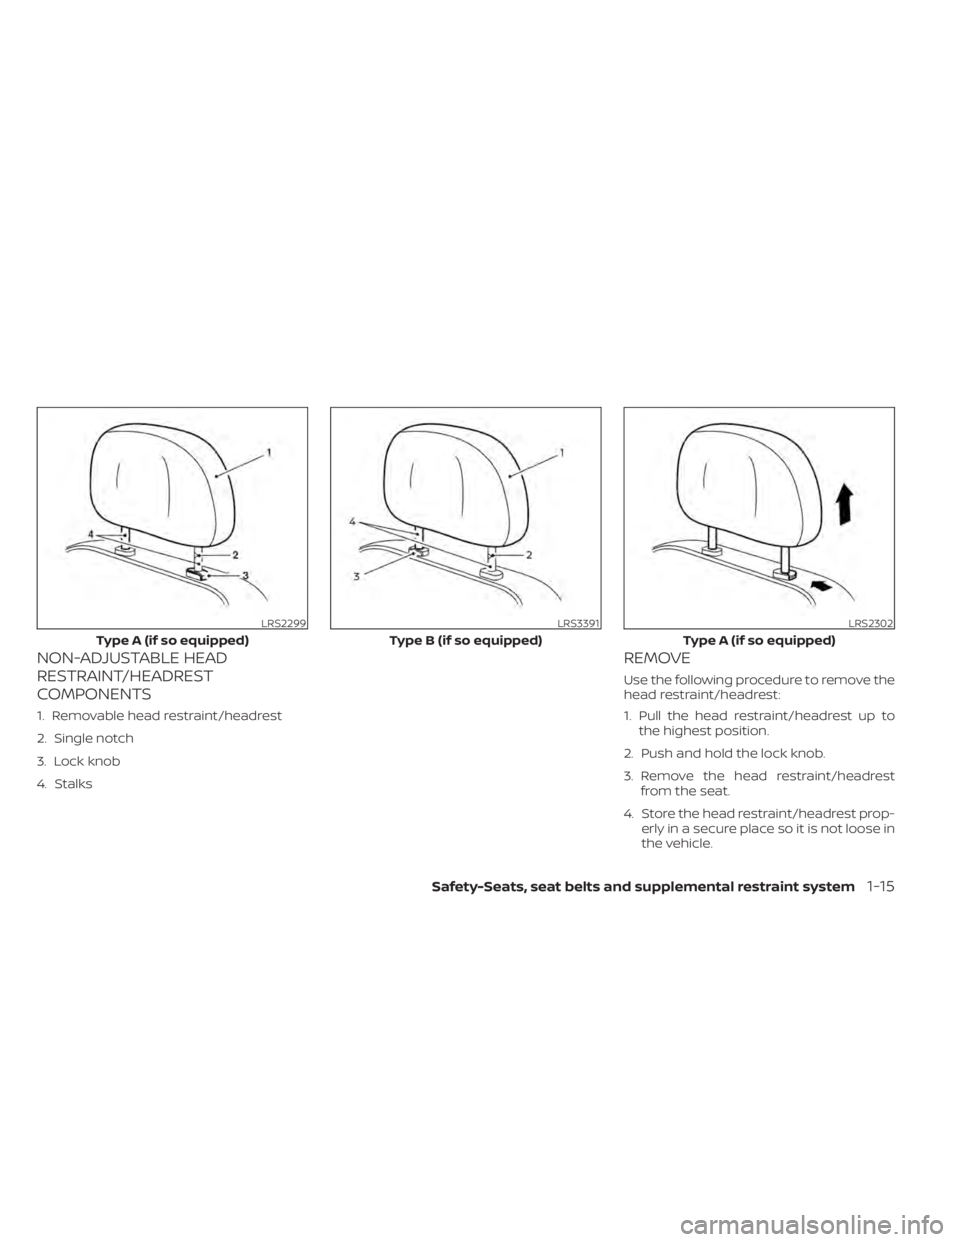 NISSAN PATHFINDER 2023 Owners Guide NON-ADJUSTABLE HEAD
RESTRAINT/HEADREST
COMPONENTS
1. Removable head restraint/headrest
2. Single notch
3. Lock knob
4. Stalks
REMOVE
Use the following procedure to remove the
head restraint/headrest:
